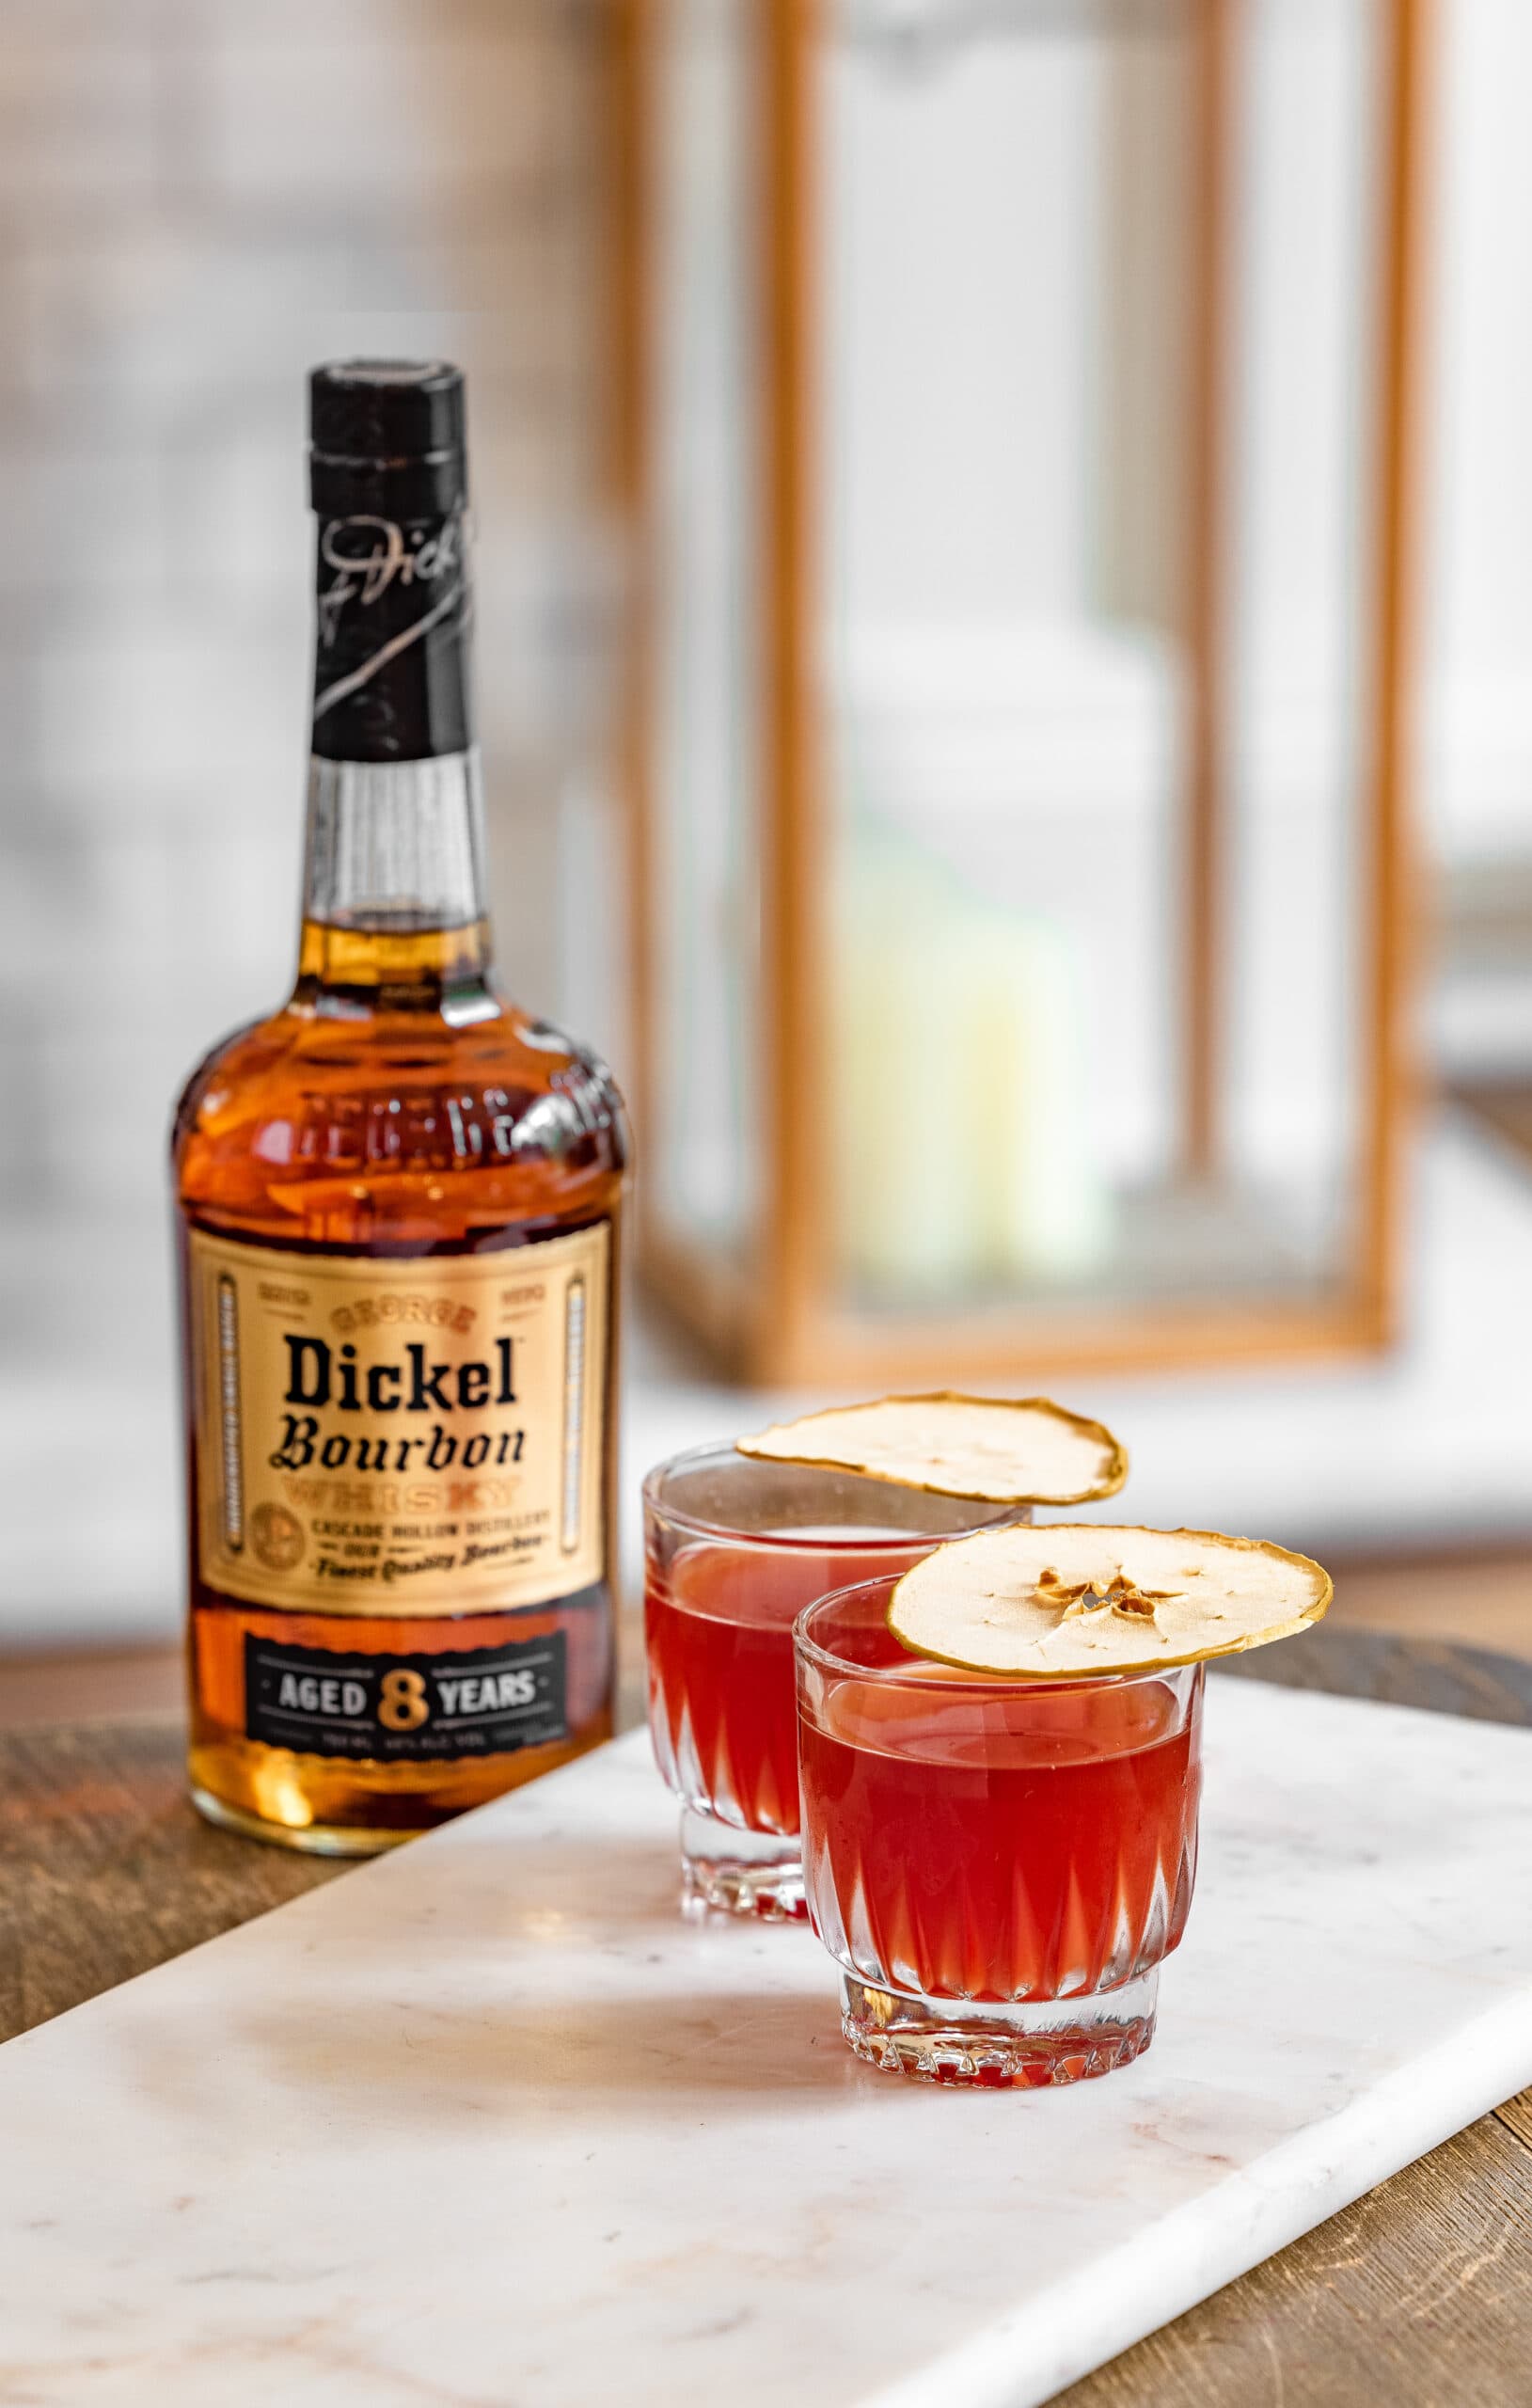 George Dickel bourbon bottle with apple cocktail